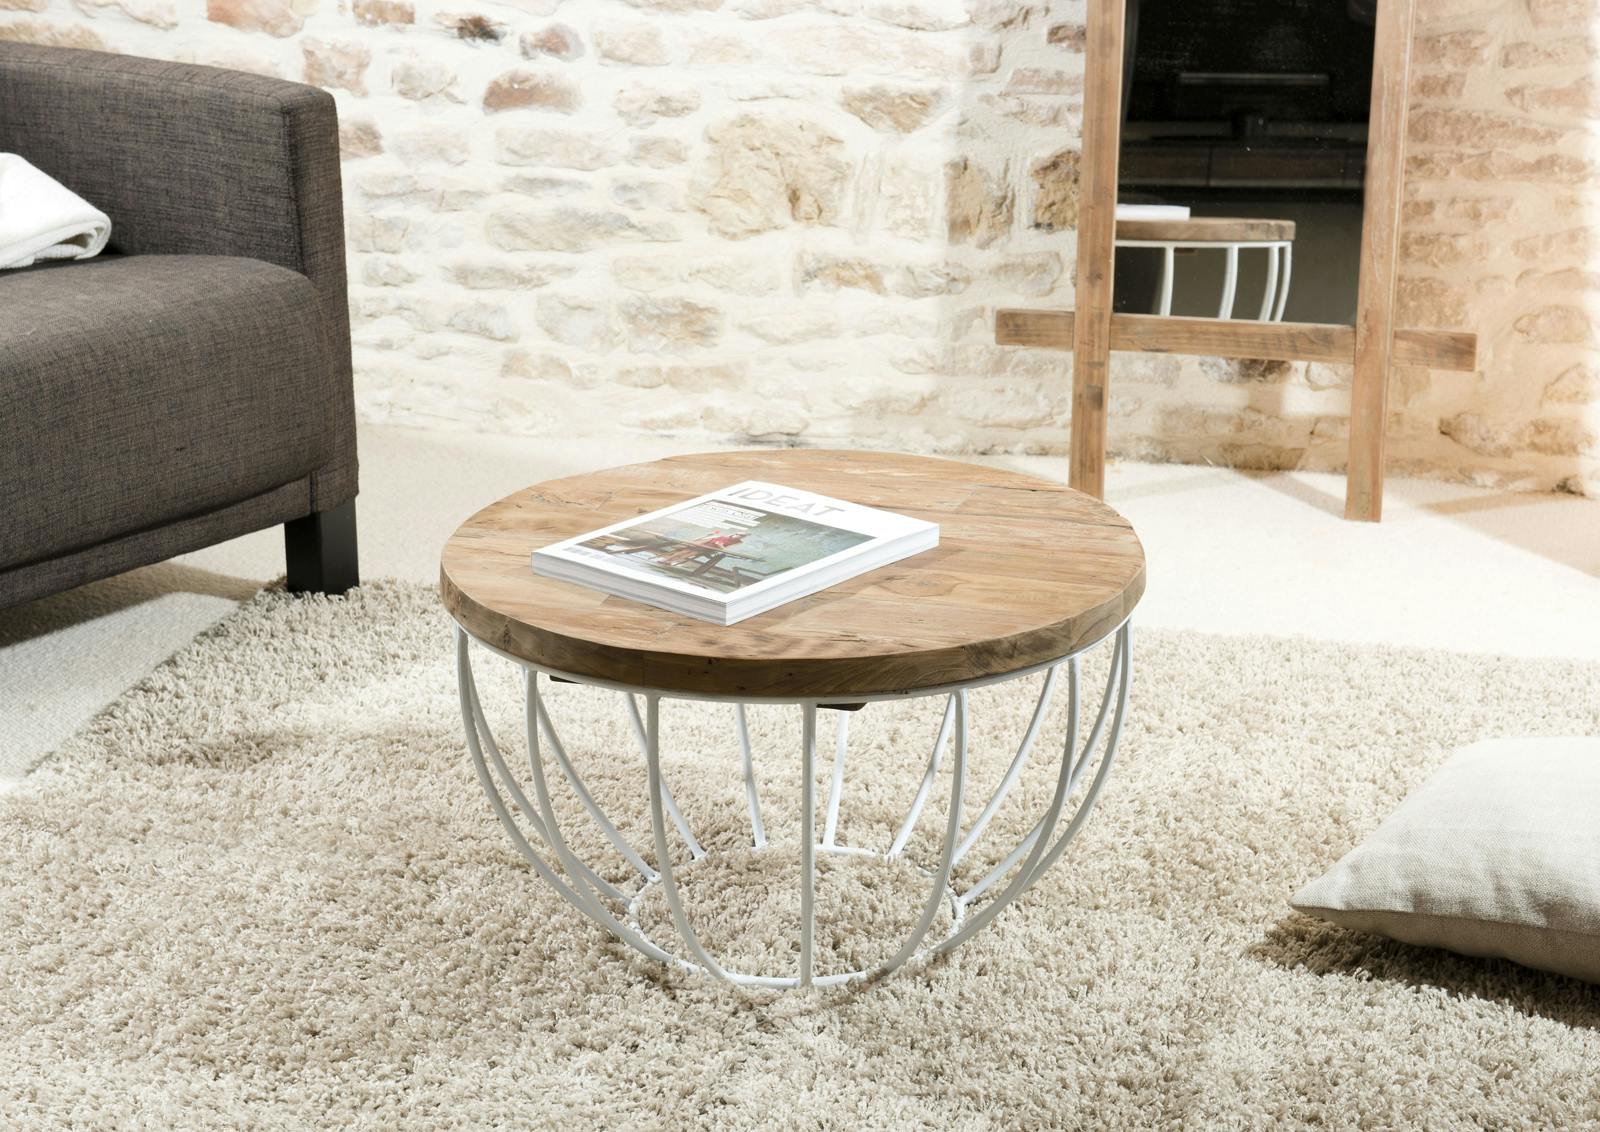 Petite table basse ronde teck recyclé structure filaire blanche SWING